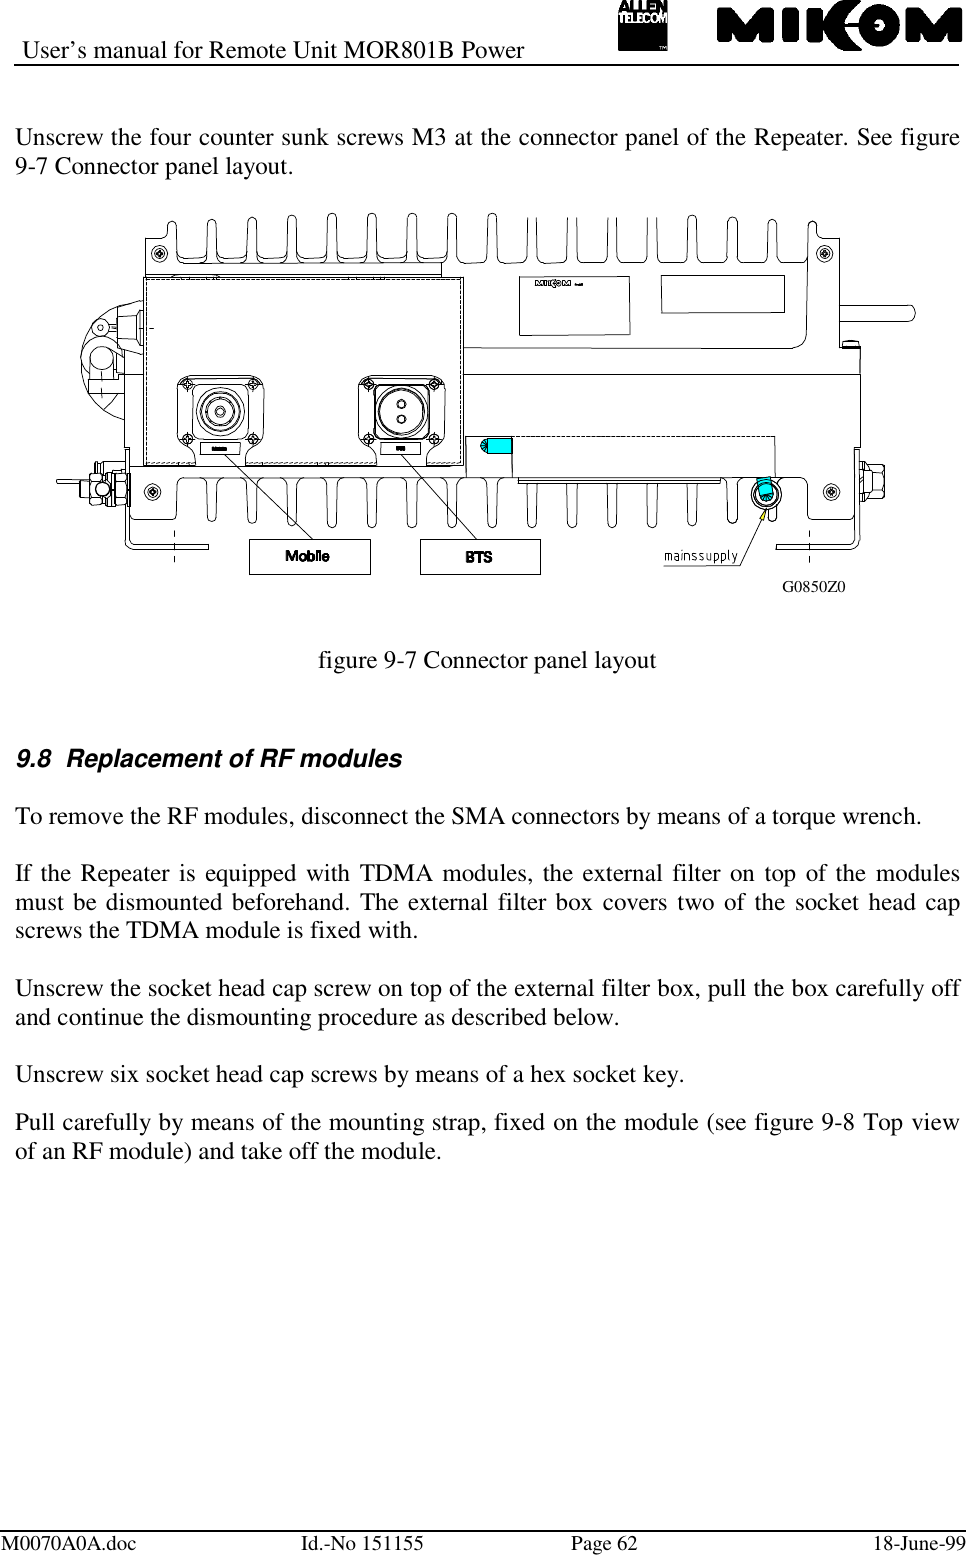 User’s manual for Remote Unit MOR801B PowerM0070A0A.doc Id.-No 151155 Page 62 18-June-99Unscrew the four counter sunk screws M3 at the connector panel of the Repeater. See figure9-7 Connector panel layout.figure 9-7 Connector panel layout9.8  Replacement of RF modulesTo remove the RF modules, disconnect the SMA connectors by means of a torque wrench.If the Repeater is equipped with TDMA modules, the external filter on top of the modulesmust be dismounted beforehand. The external filter box covers two of the socket head capscrews the TDMA module is fixed with.Unscrew the socket head cap screw on top of the external filter box, pull the box carefully offand continue the dismounting procedure as described below.Unscrew six socket head cap screws by means of a hex socket key.Pull carefully by means of the mounting strap, fixed on the module (see figure 9-8 Top viewof an RF module) and take off the module.G0850Z0